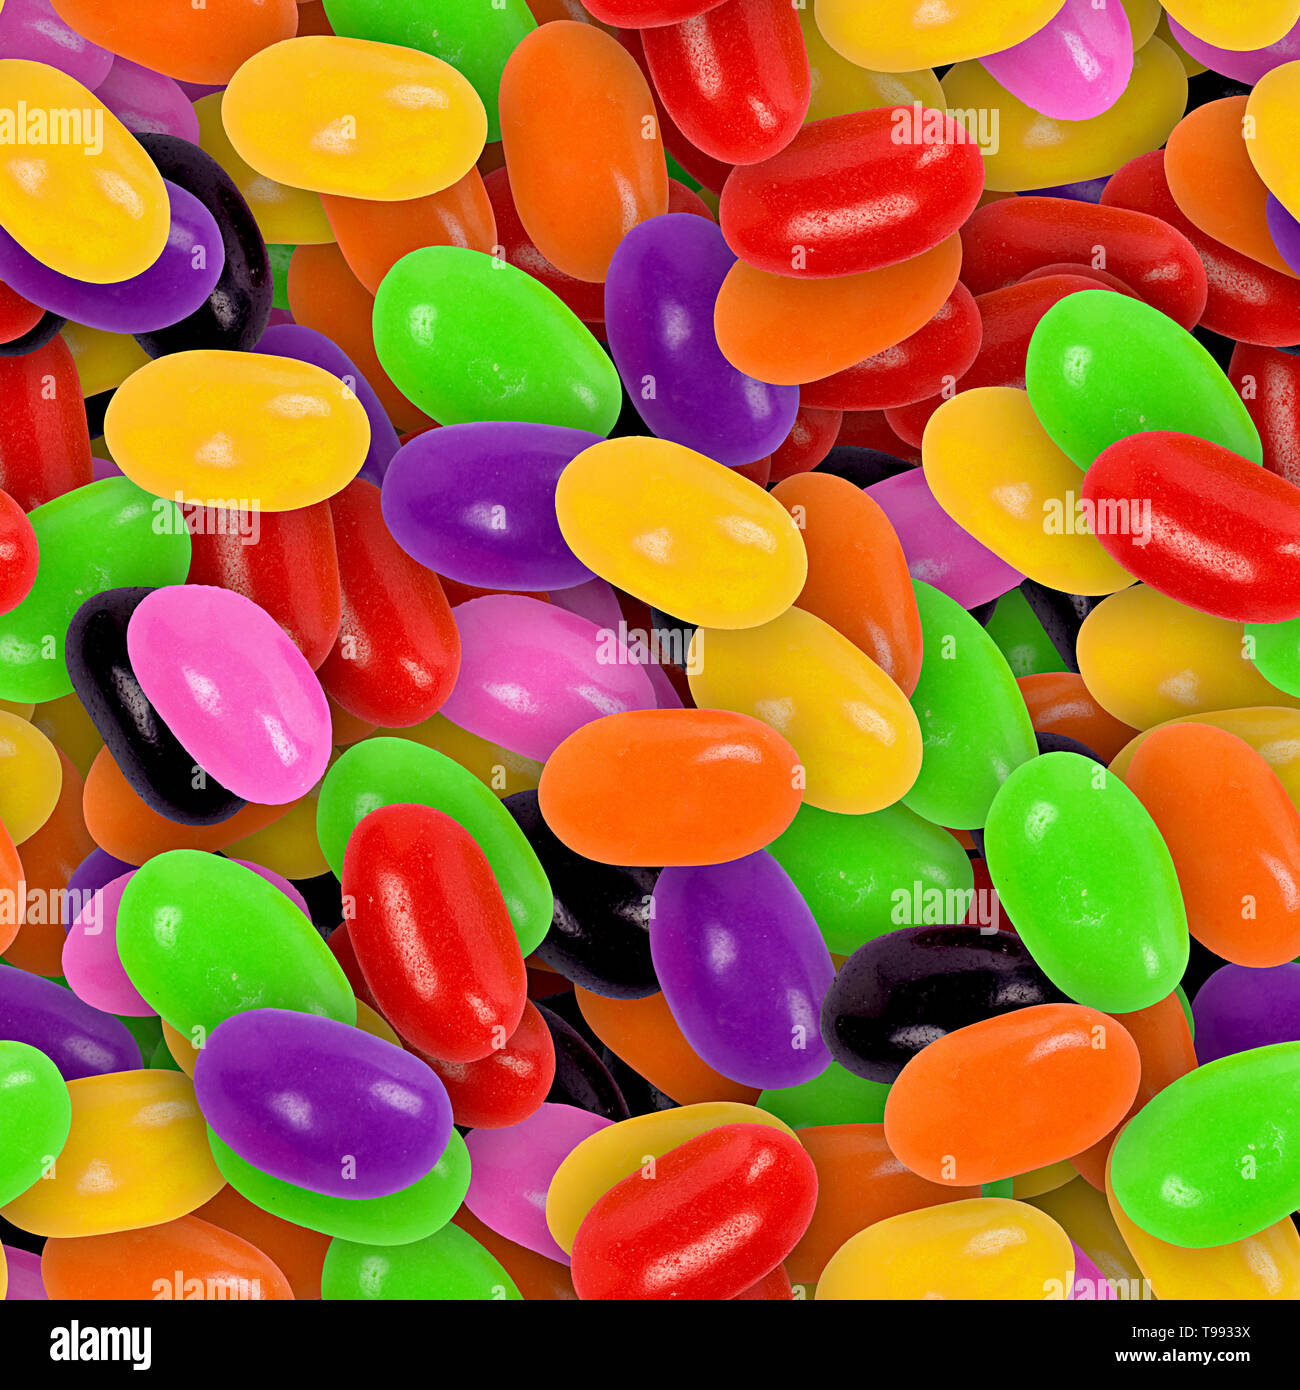 Jelly Bean Candy Texture Seamless Tile Foto Stock